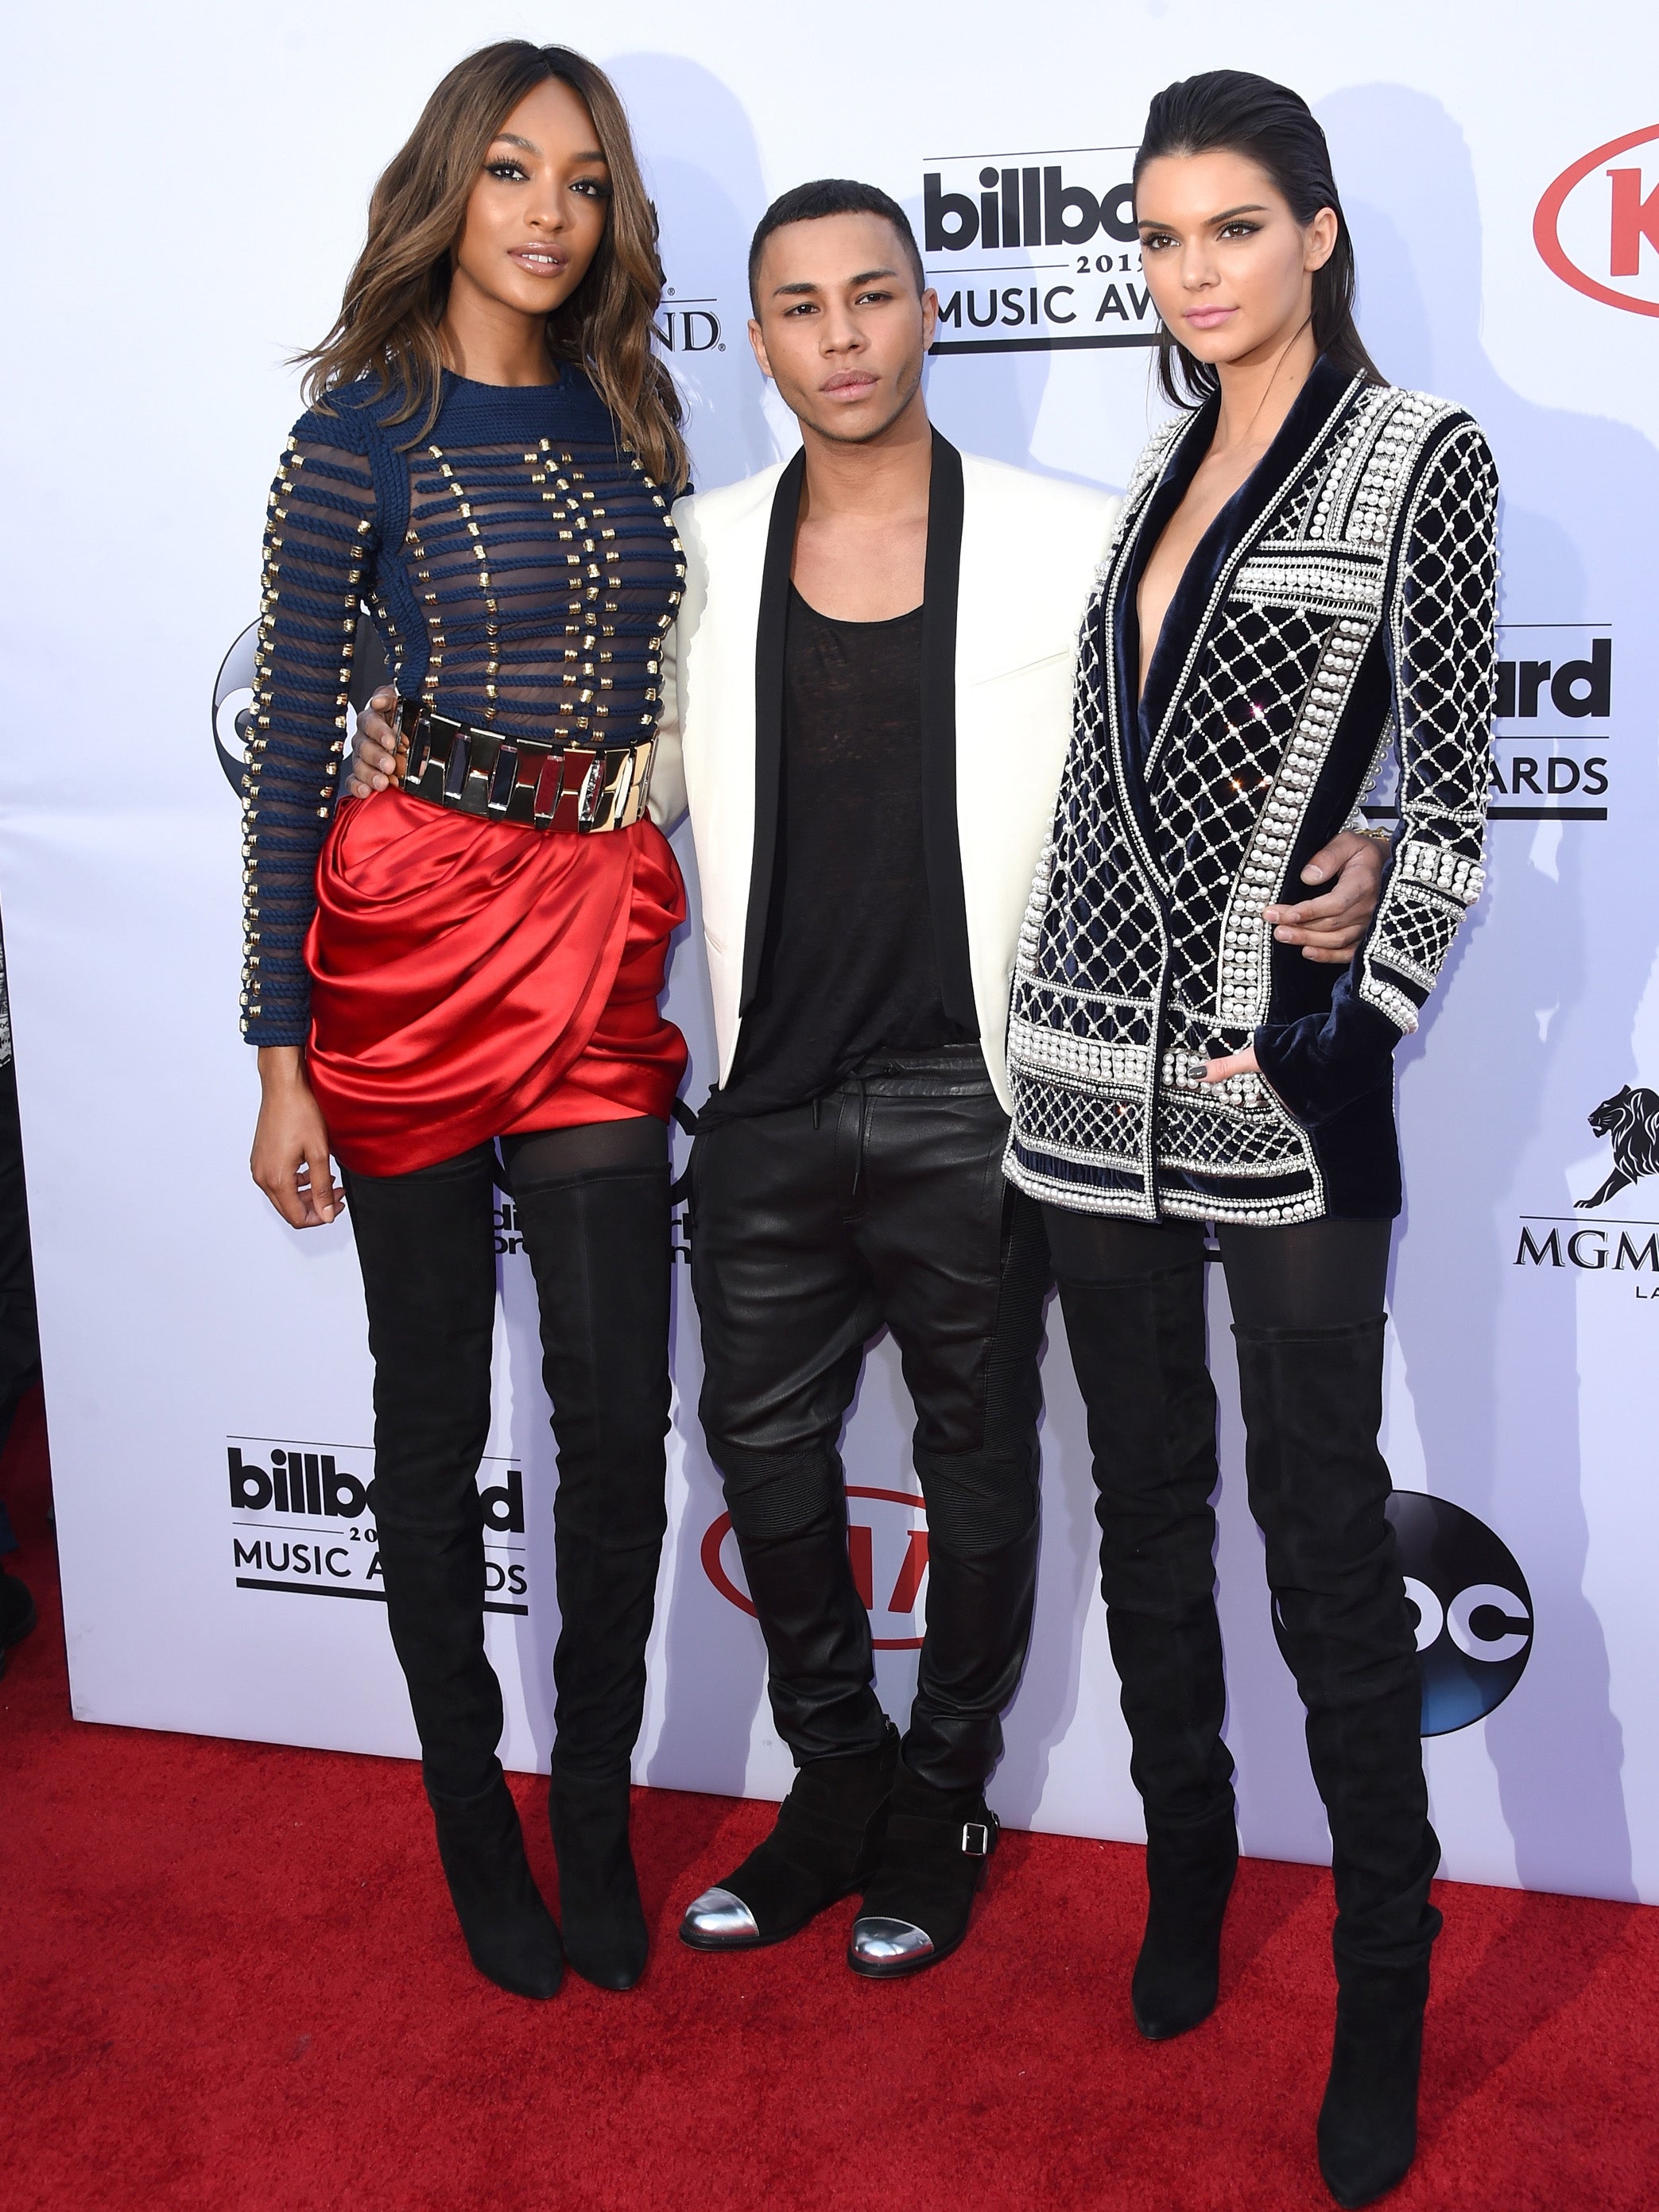 Jourdan Dunn and Kendall Jenner with Olivier Rousteing wearing designers from the upcoming collaboration